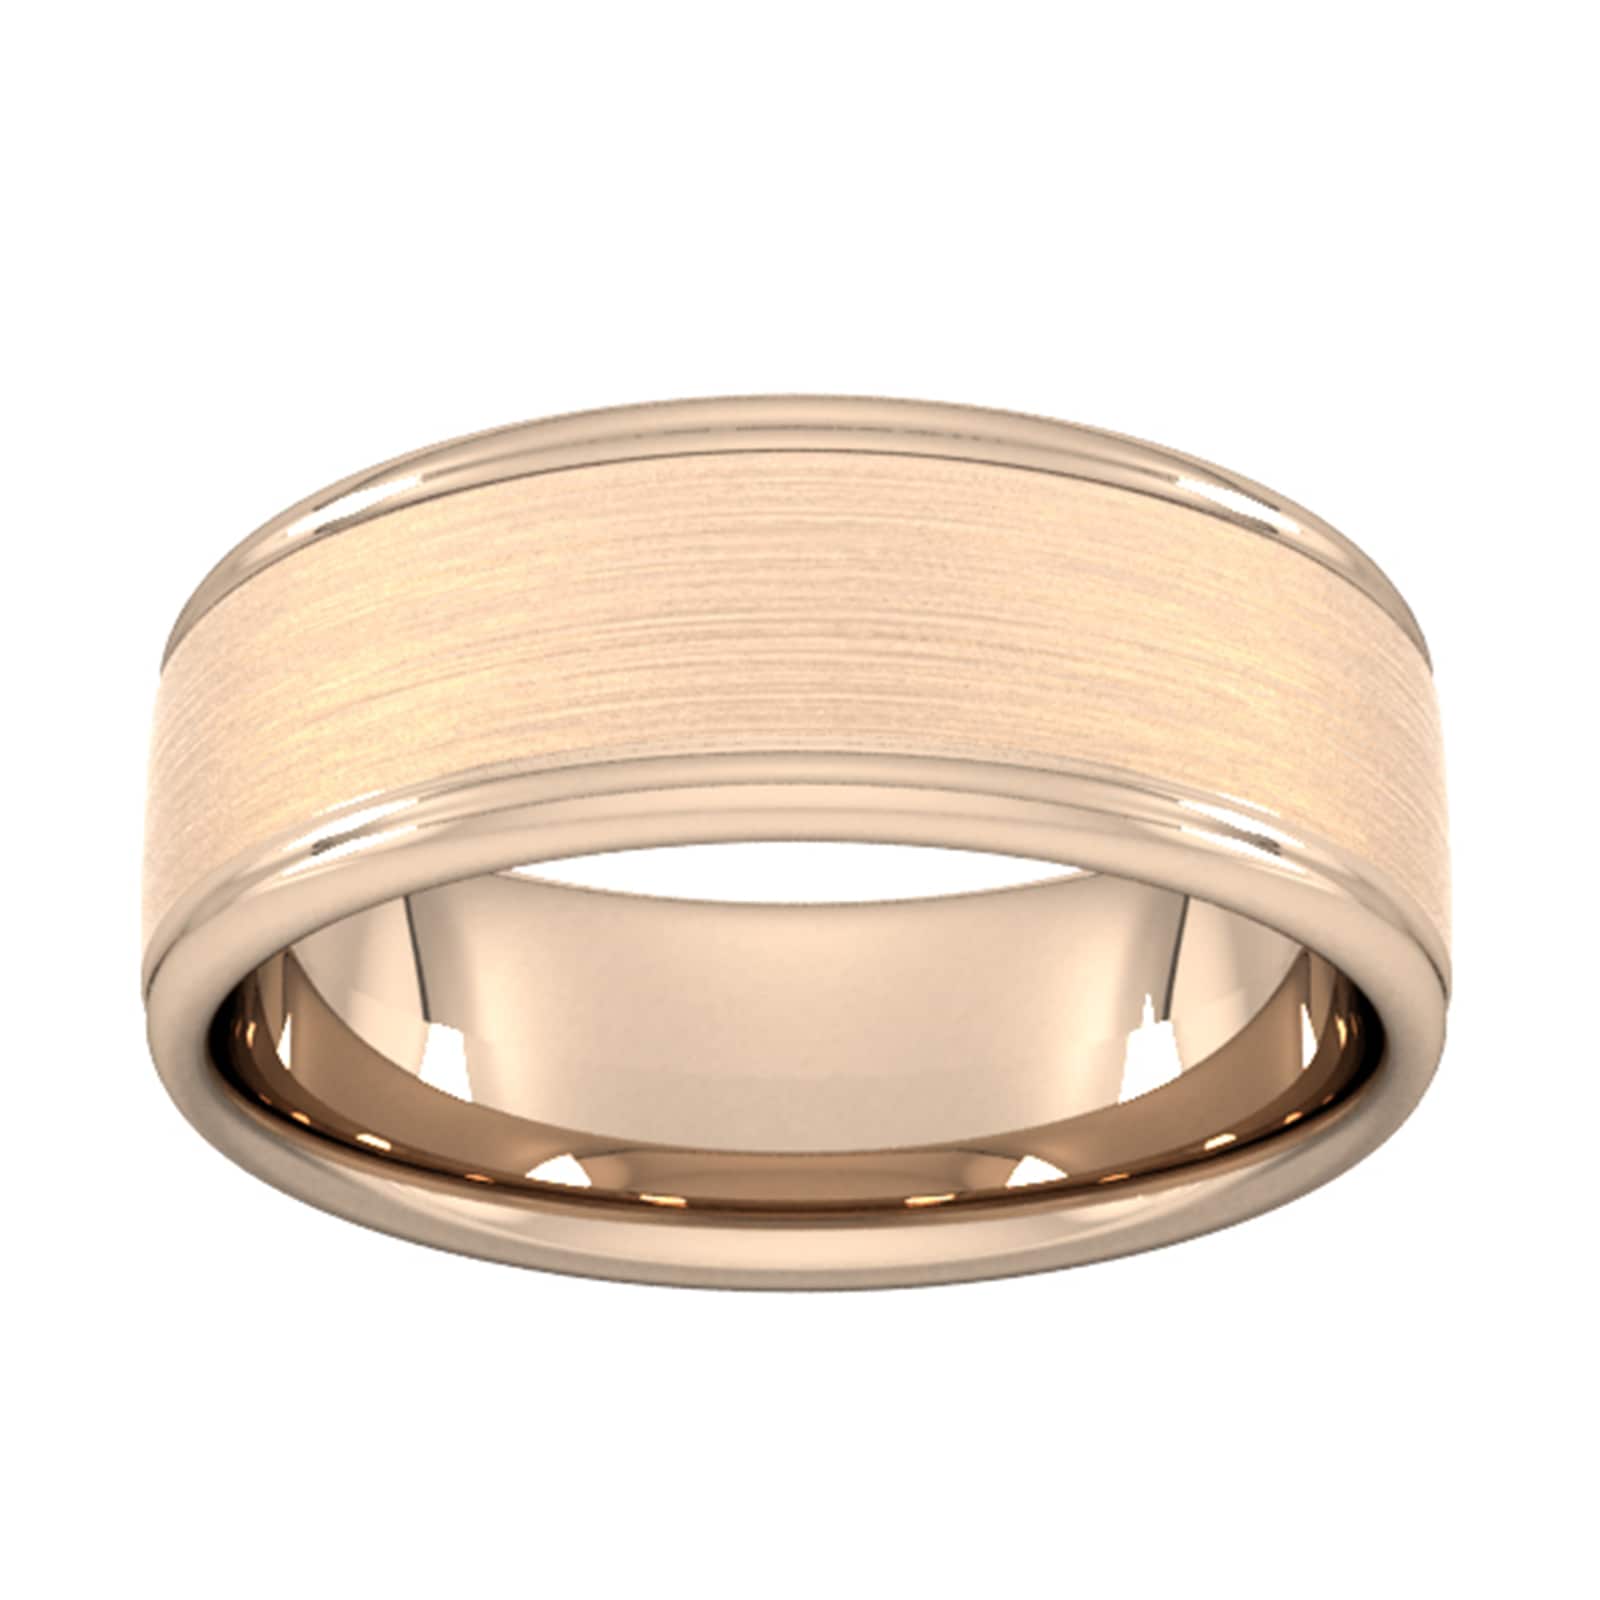 8mm Traditional Court Heavy Matt Centre With Grooves Wedding Ring In 18 Carat Rose Gold - Ring Size M